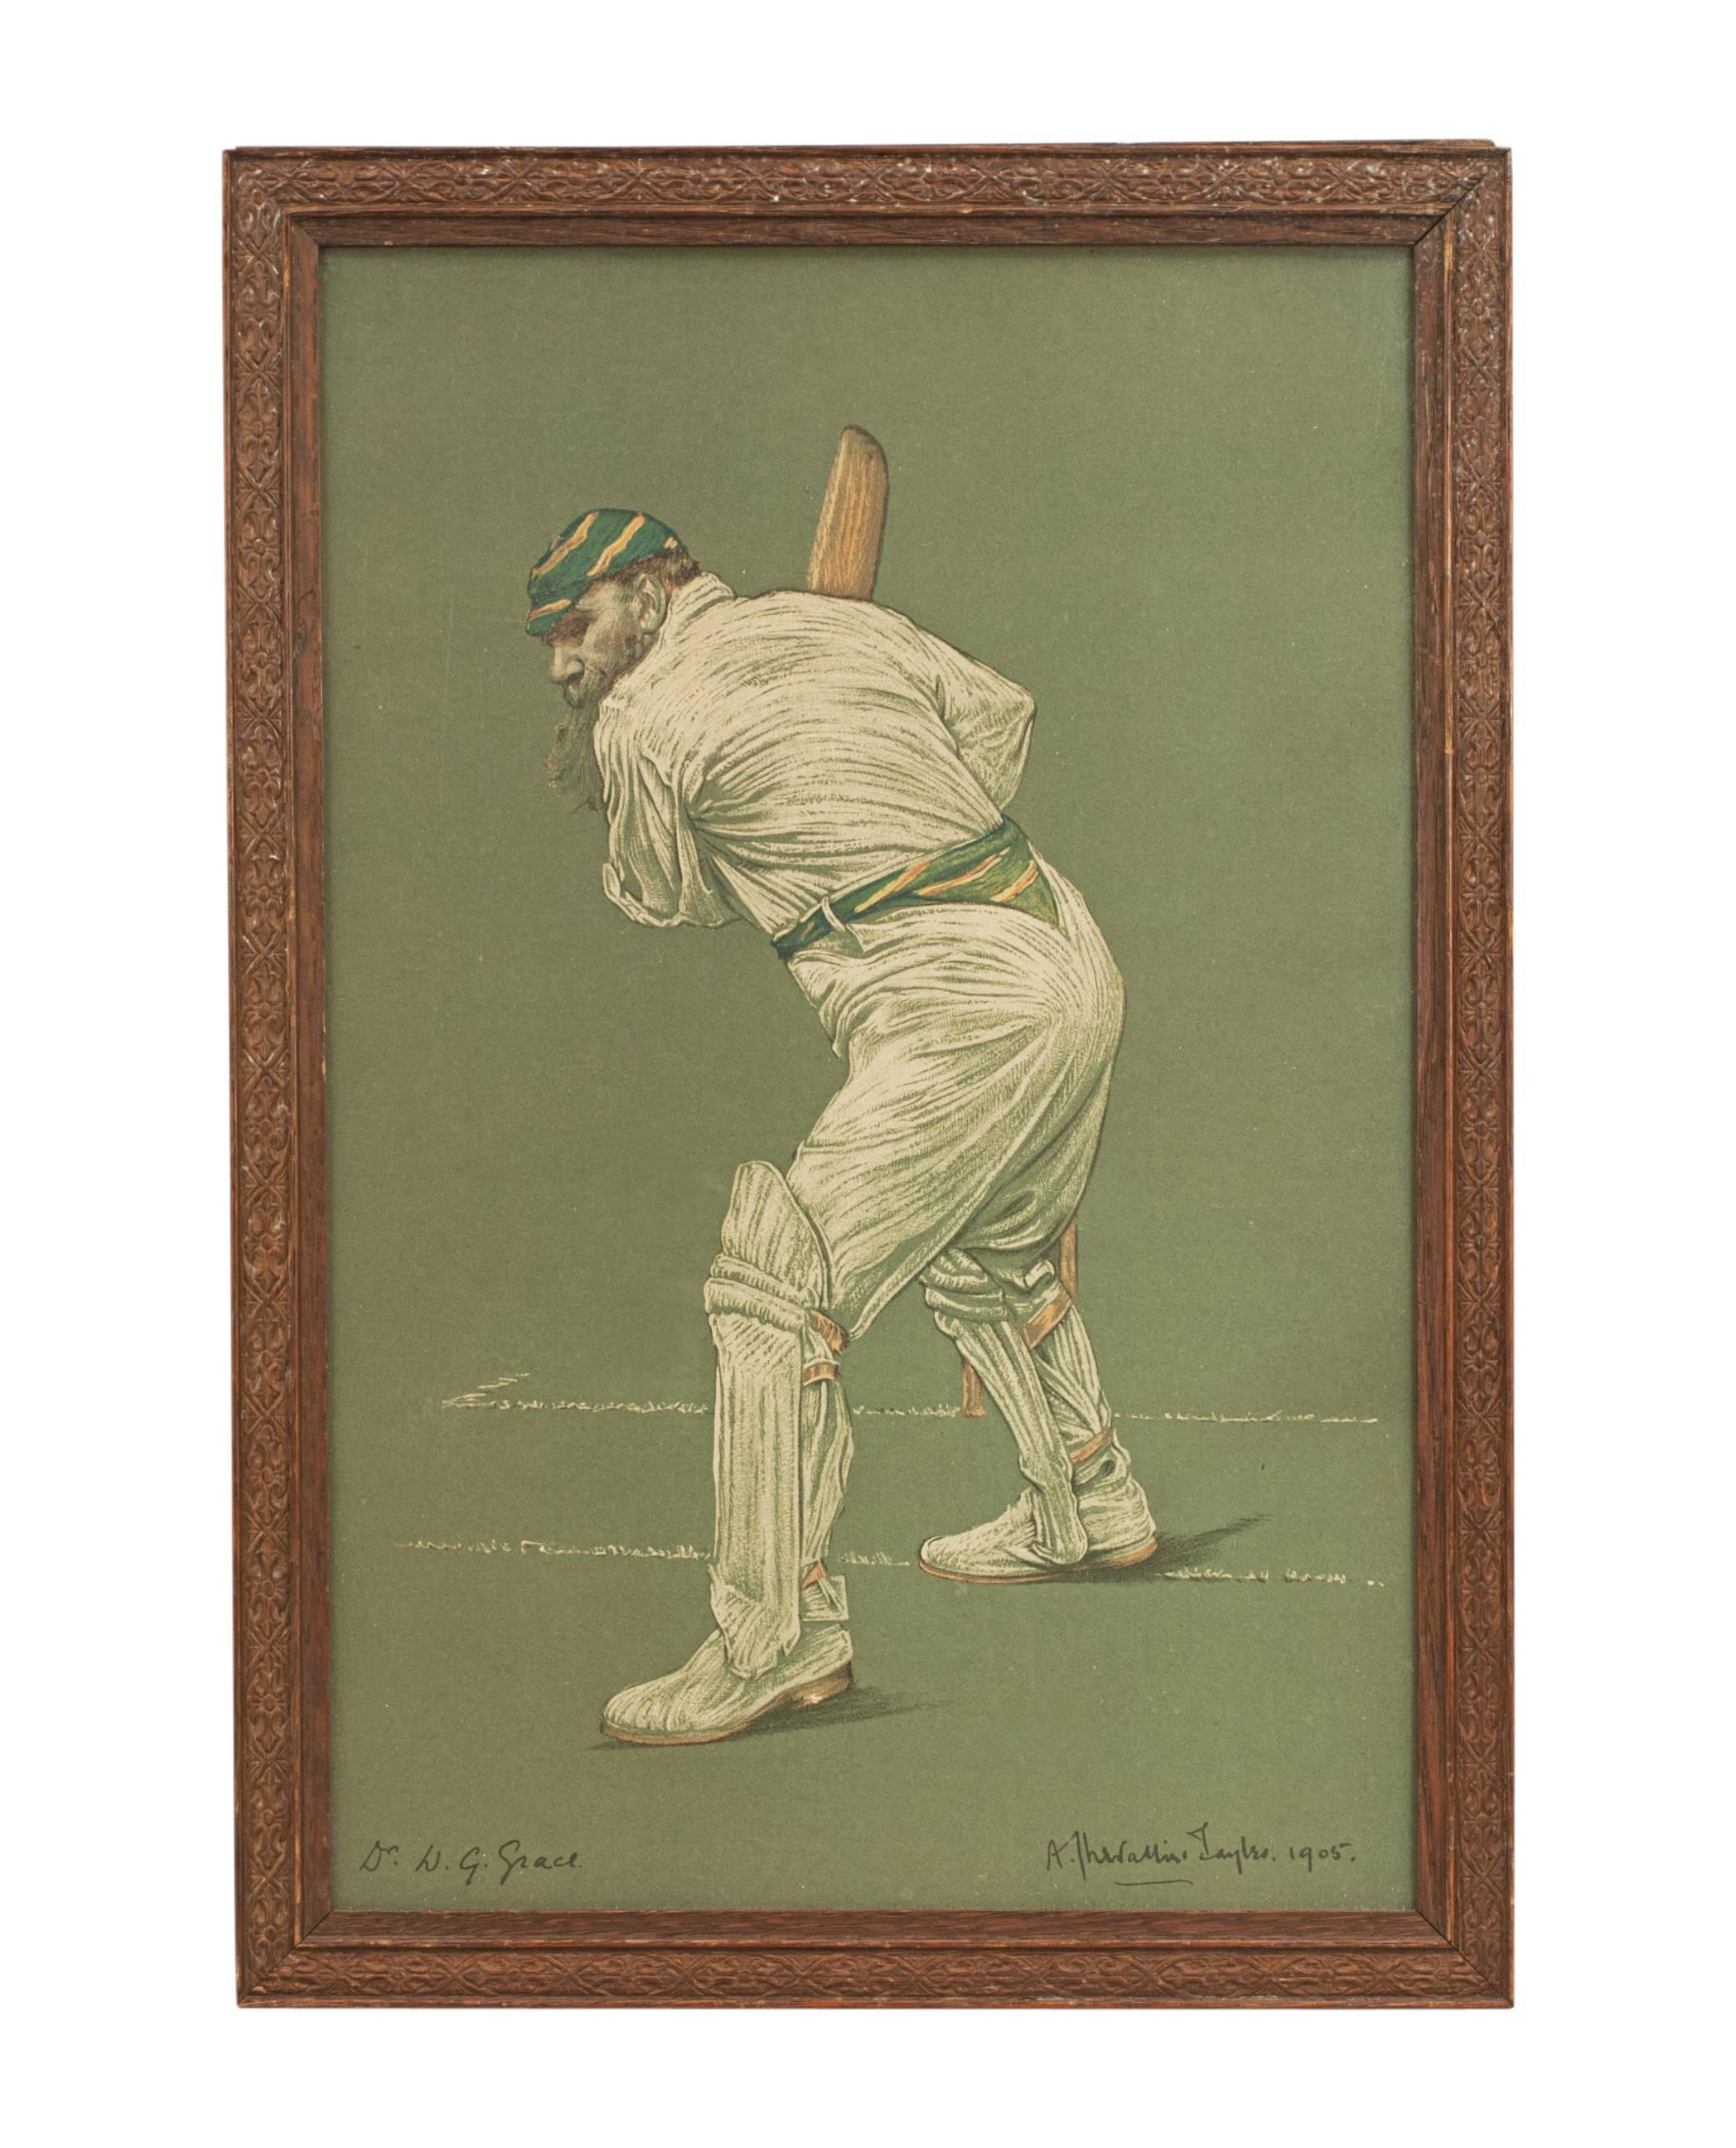 Six cricket prints.
A wonderful set of six colored cricket lithographs after Albert Chevallier Tayler. The cricketers are taken from the 1905 'The Empire's Cricketers' which was part of a series of 48 drawings published by the Art Society in weekly